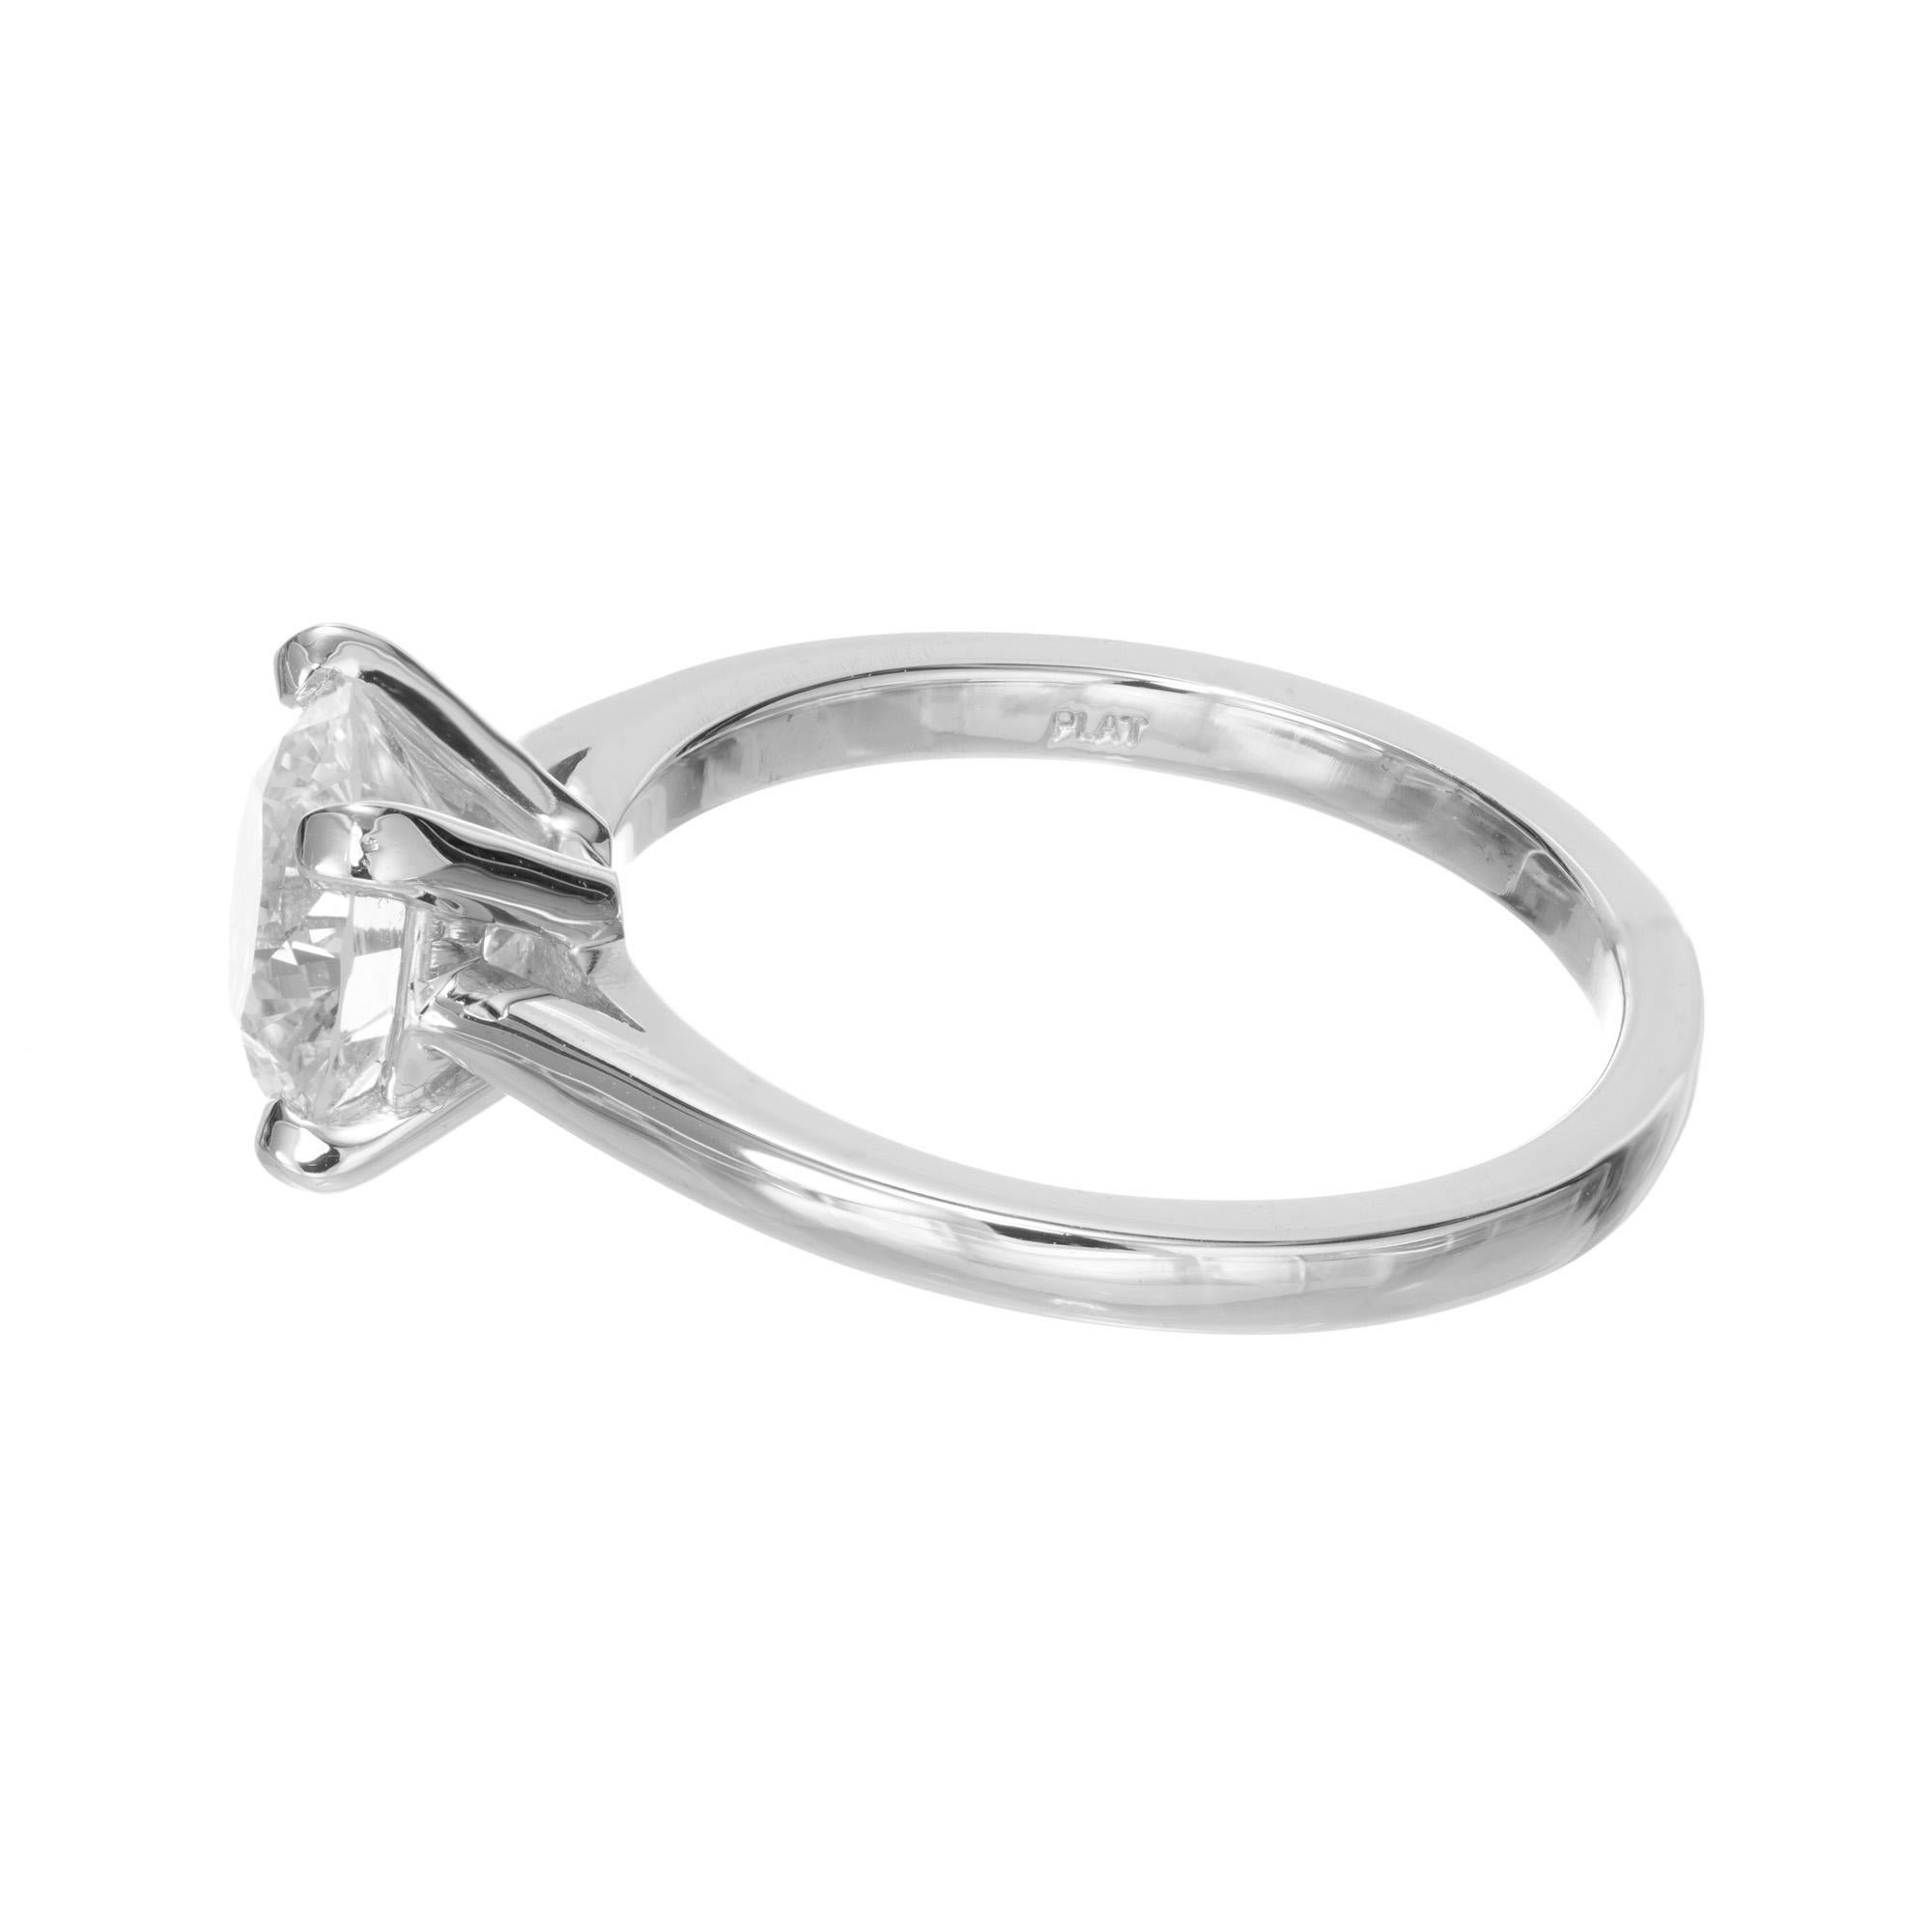 Women's Peter Suchy GIA Certified 1.66 Carat Diamond Platinum Solitaire Engagement Ring